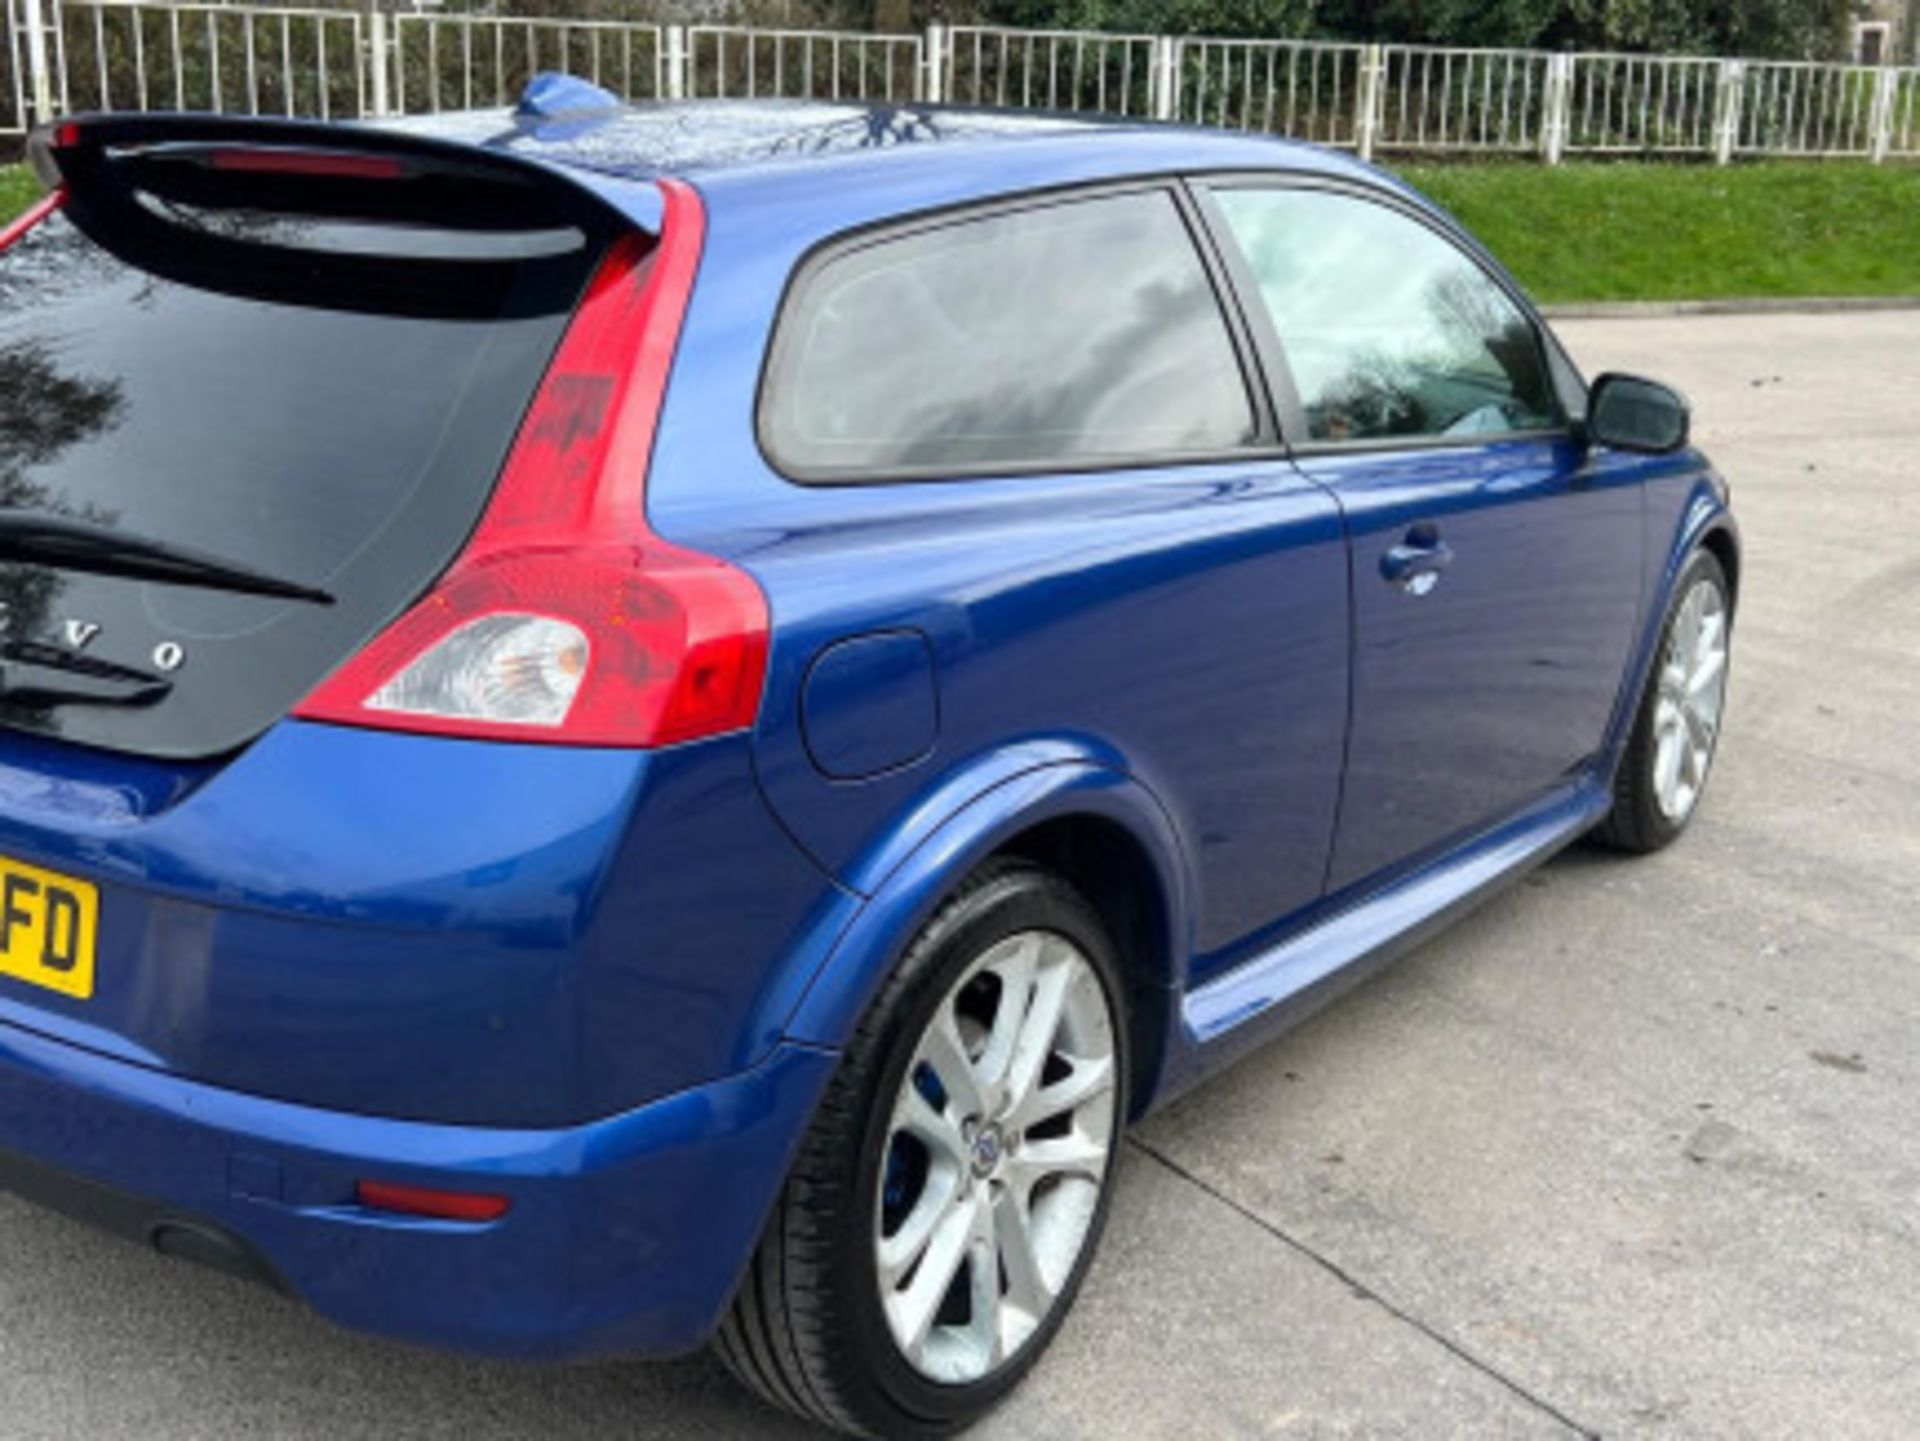 VOLVO C30 2.0D R-DESIGN SPORT 2DR - SPORTY AND LUXURIOUS COMPACT CAR >>--NO VAT ON HAMMER--<< - Image 19 of 71